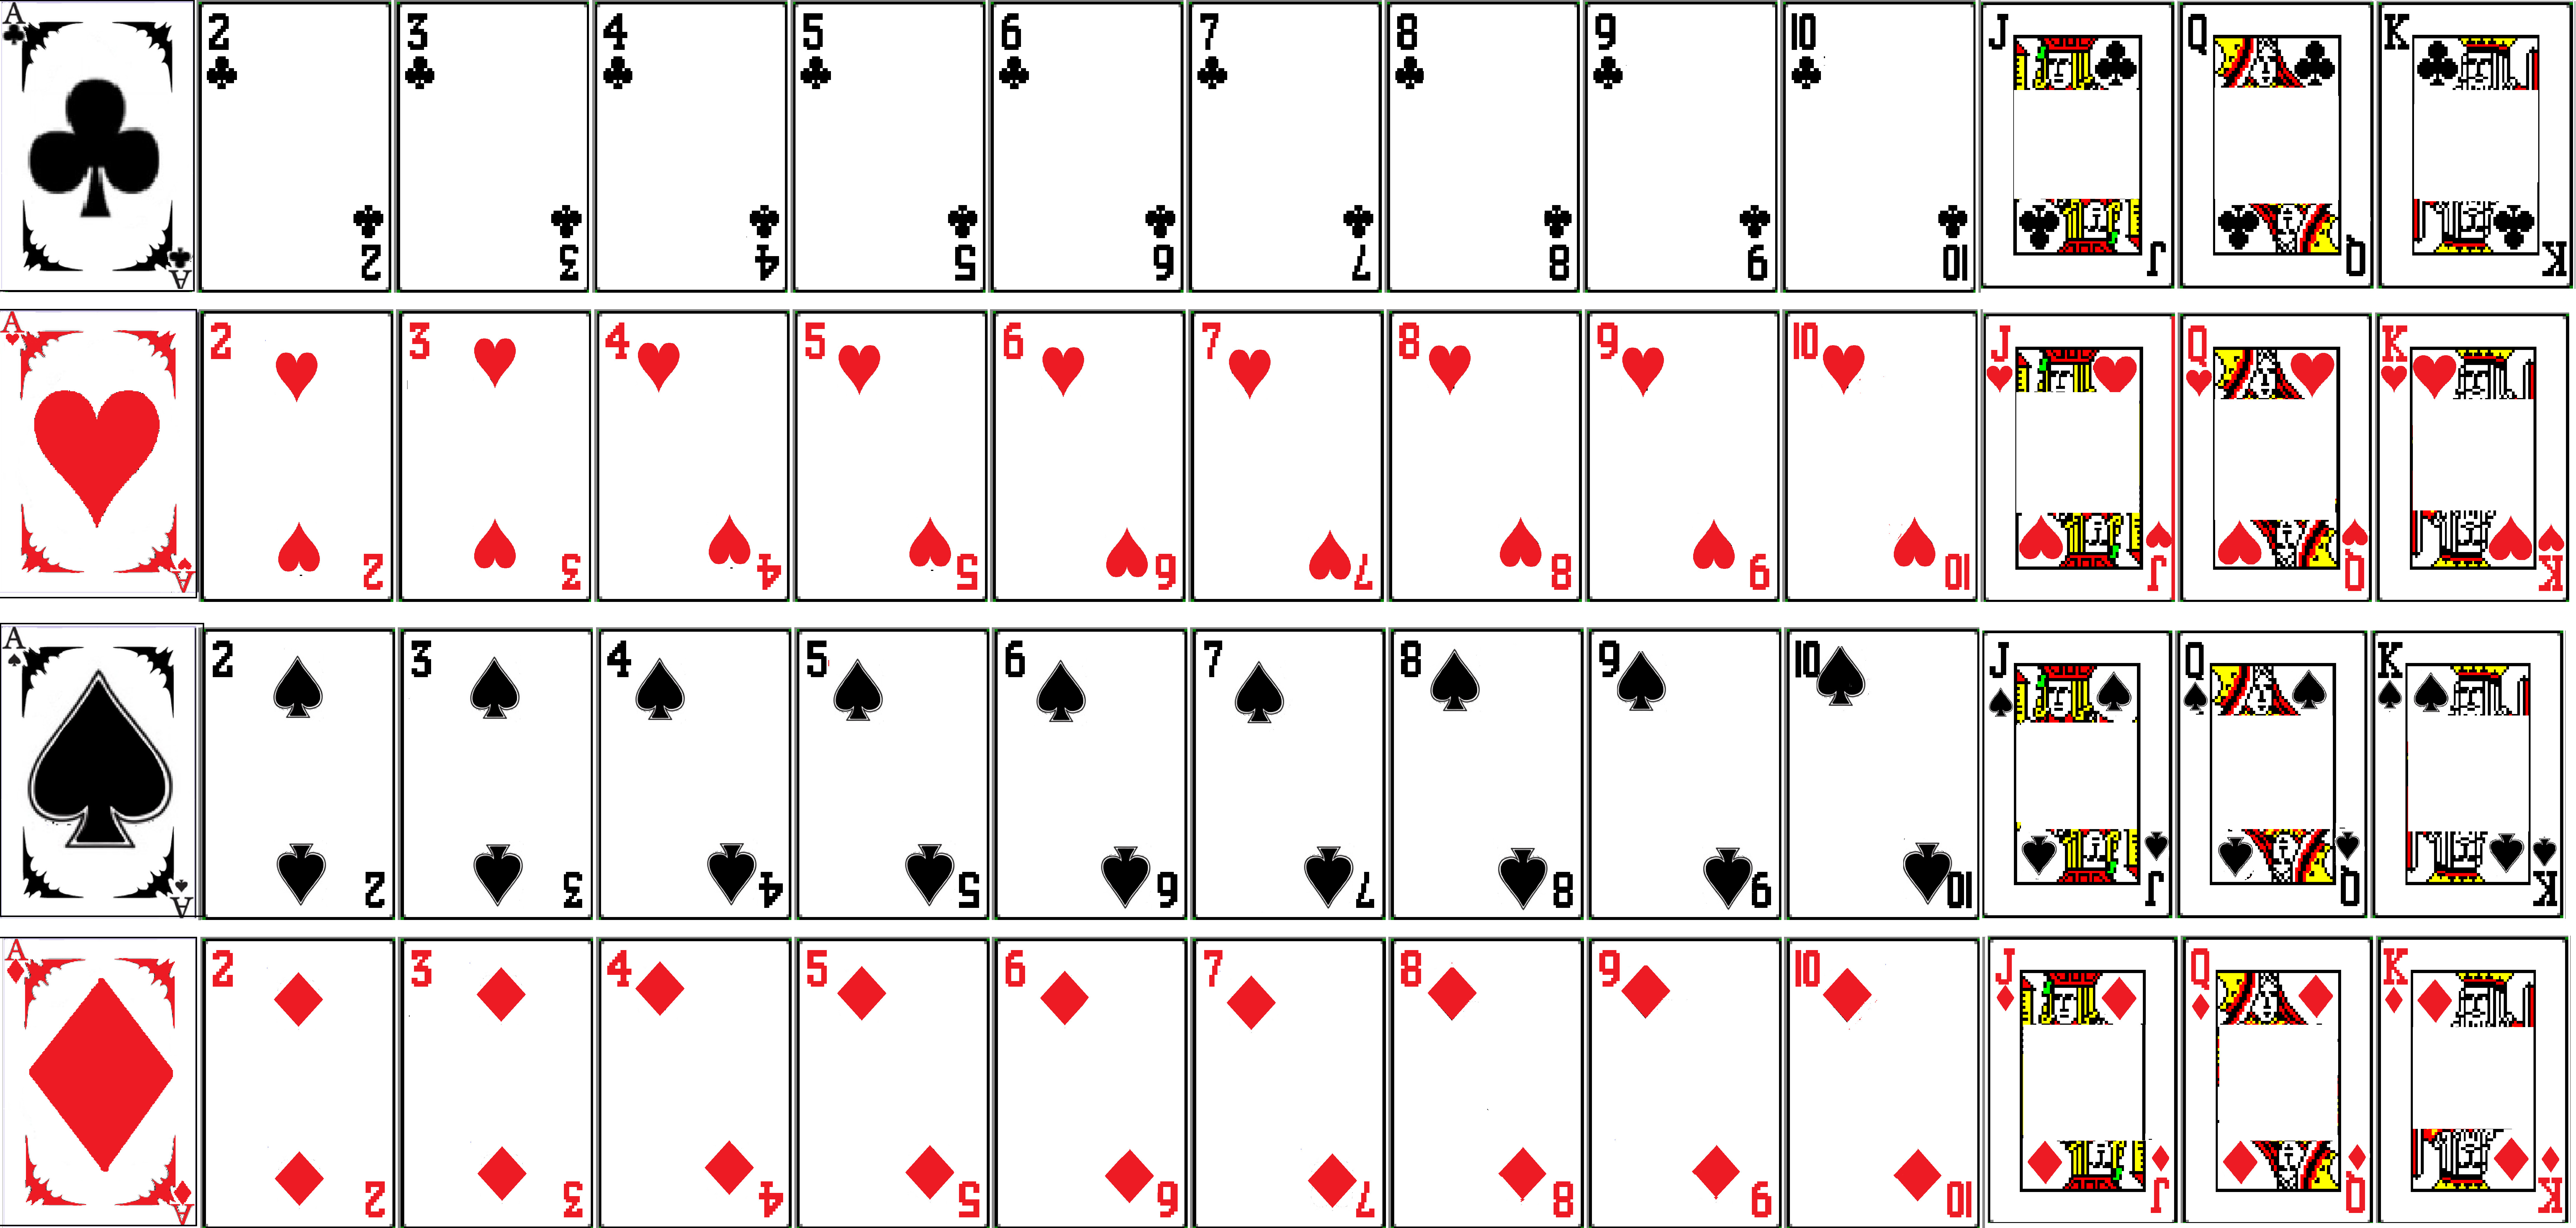 Not Learning Spider Solitaire flashcards